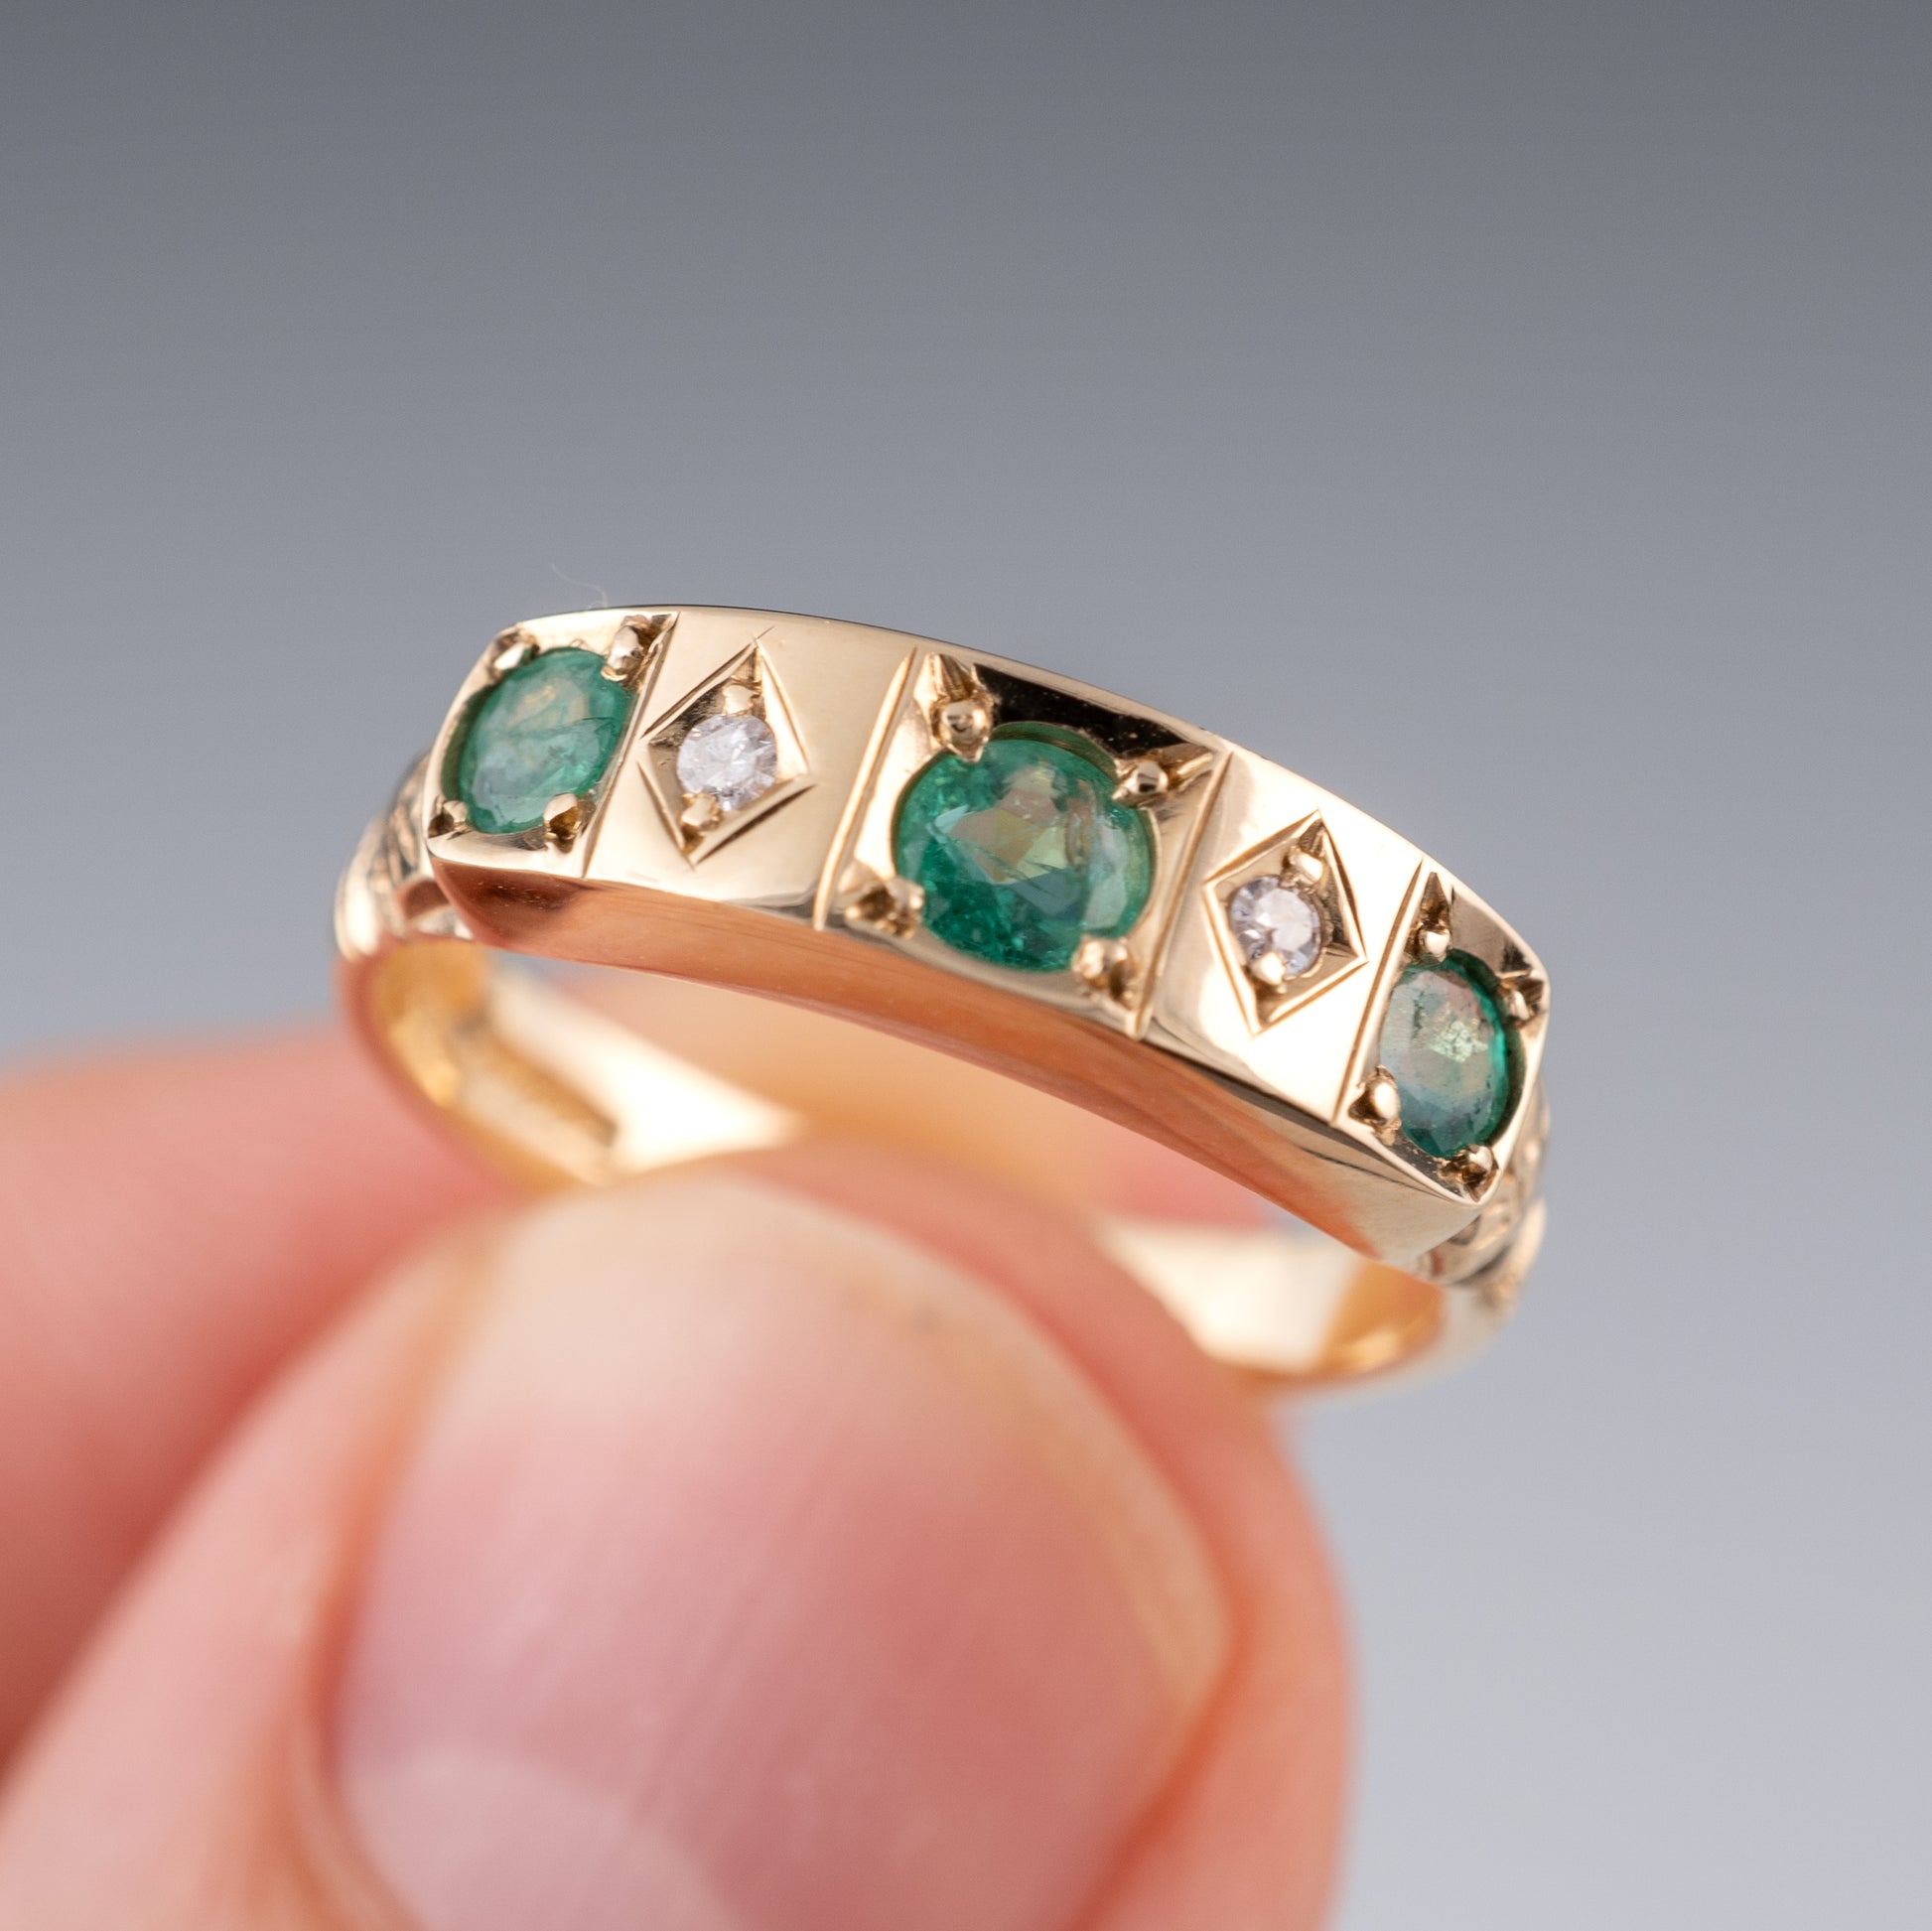 Pre Owned 9ct Yellow Gold Emerald Diamond Ring Dated Birmingham 1898 - Hunters Fine Jewellery